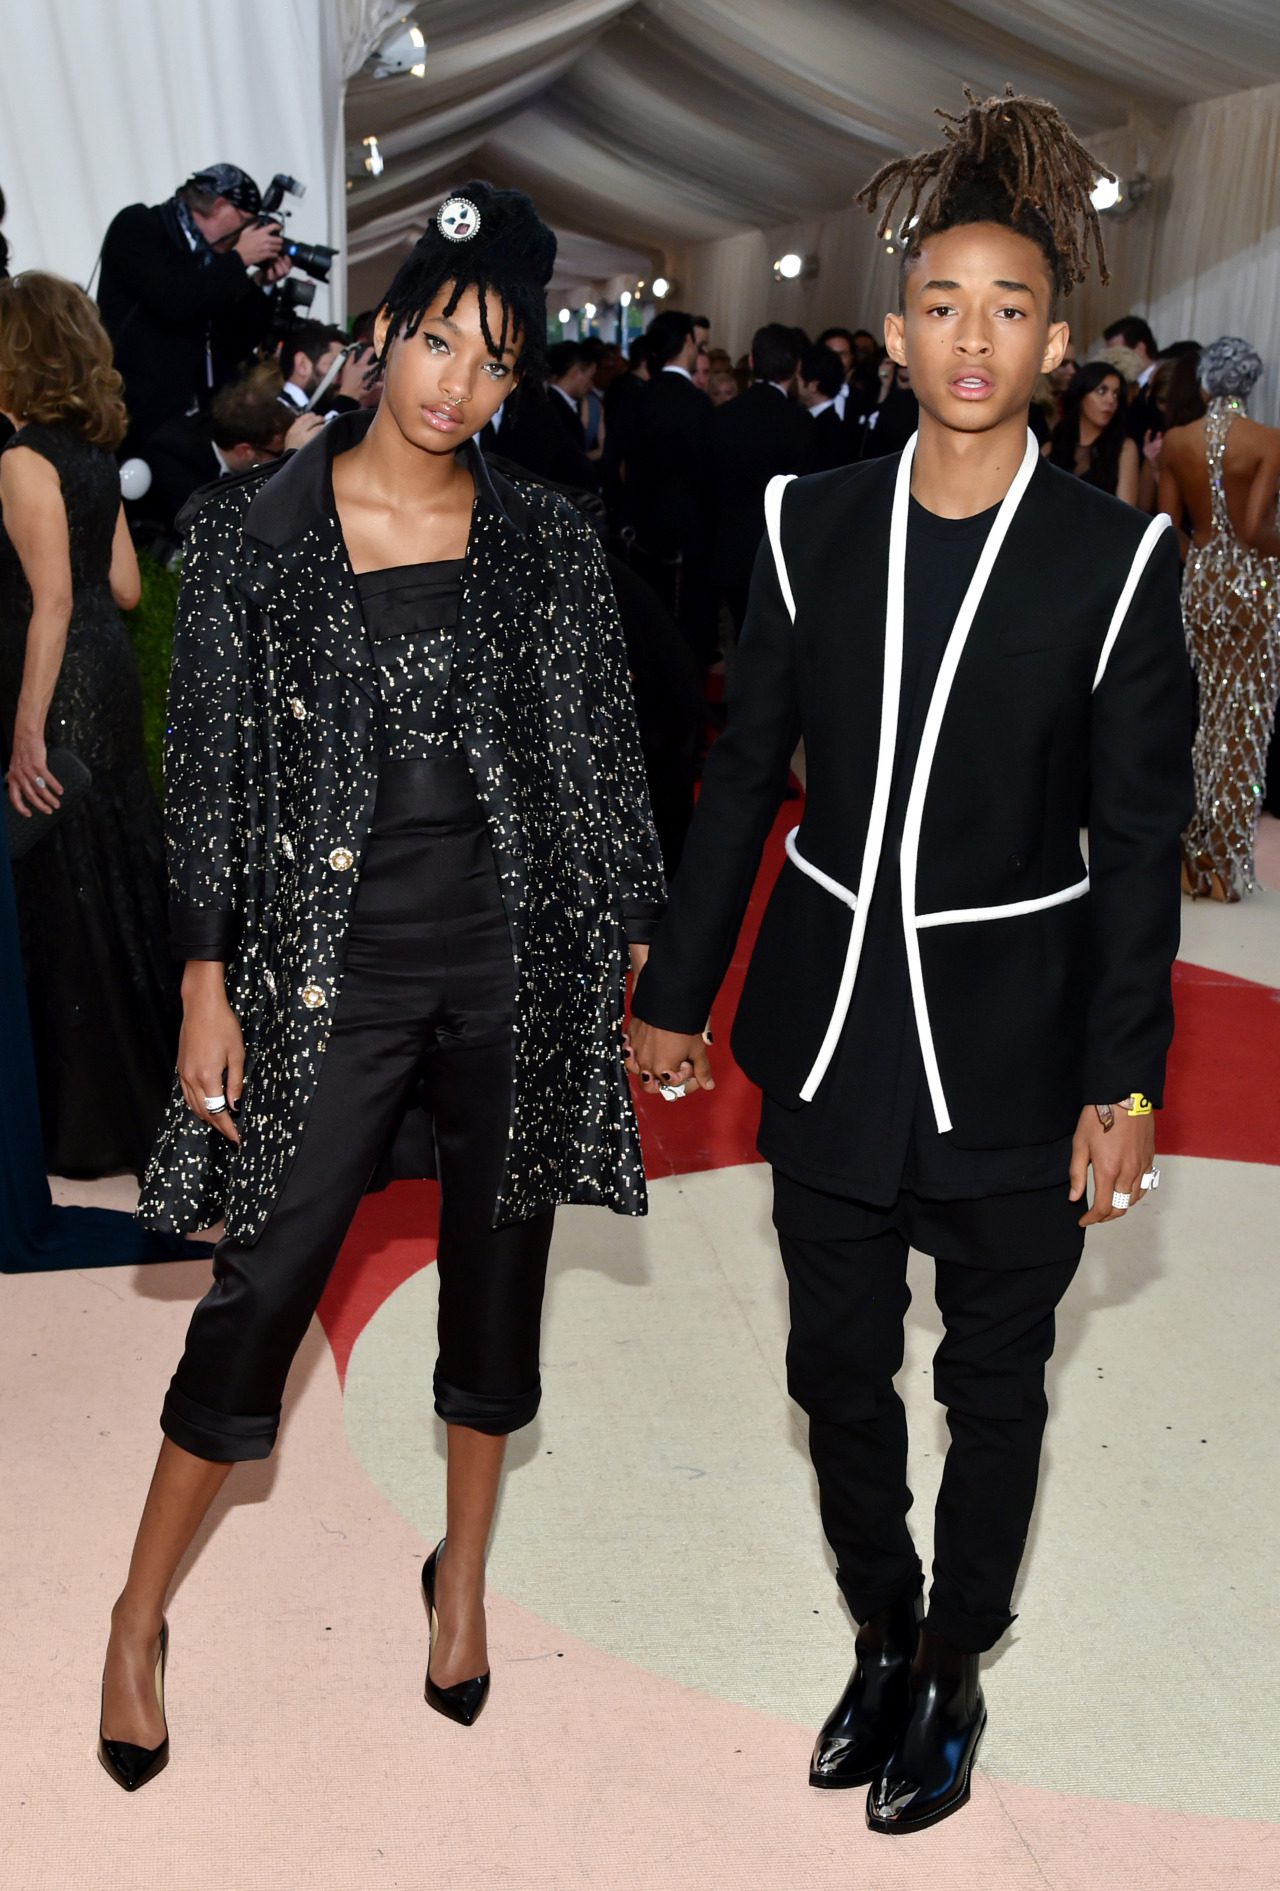 celebritiesofcolor:  Willow and Jaden Smith attend the “Manus x Machina: Fashion